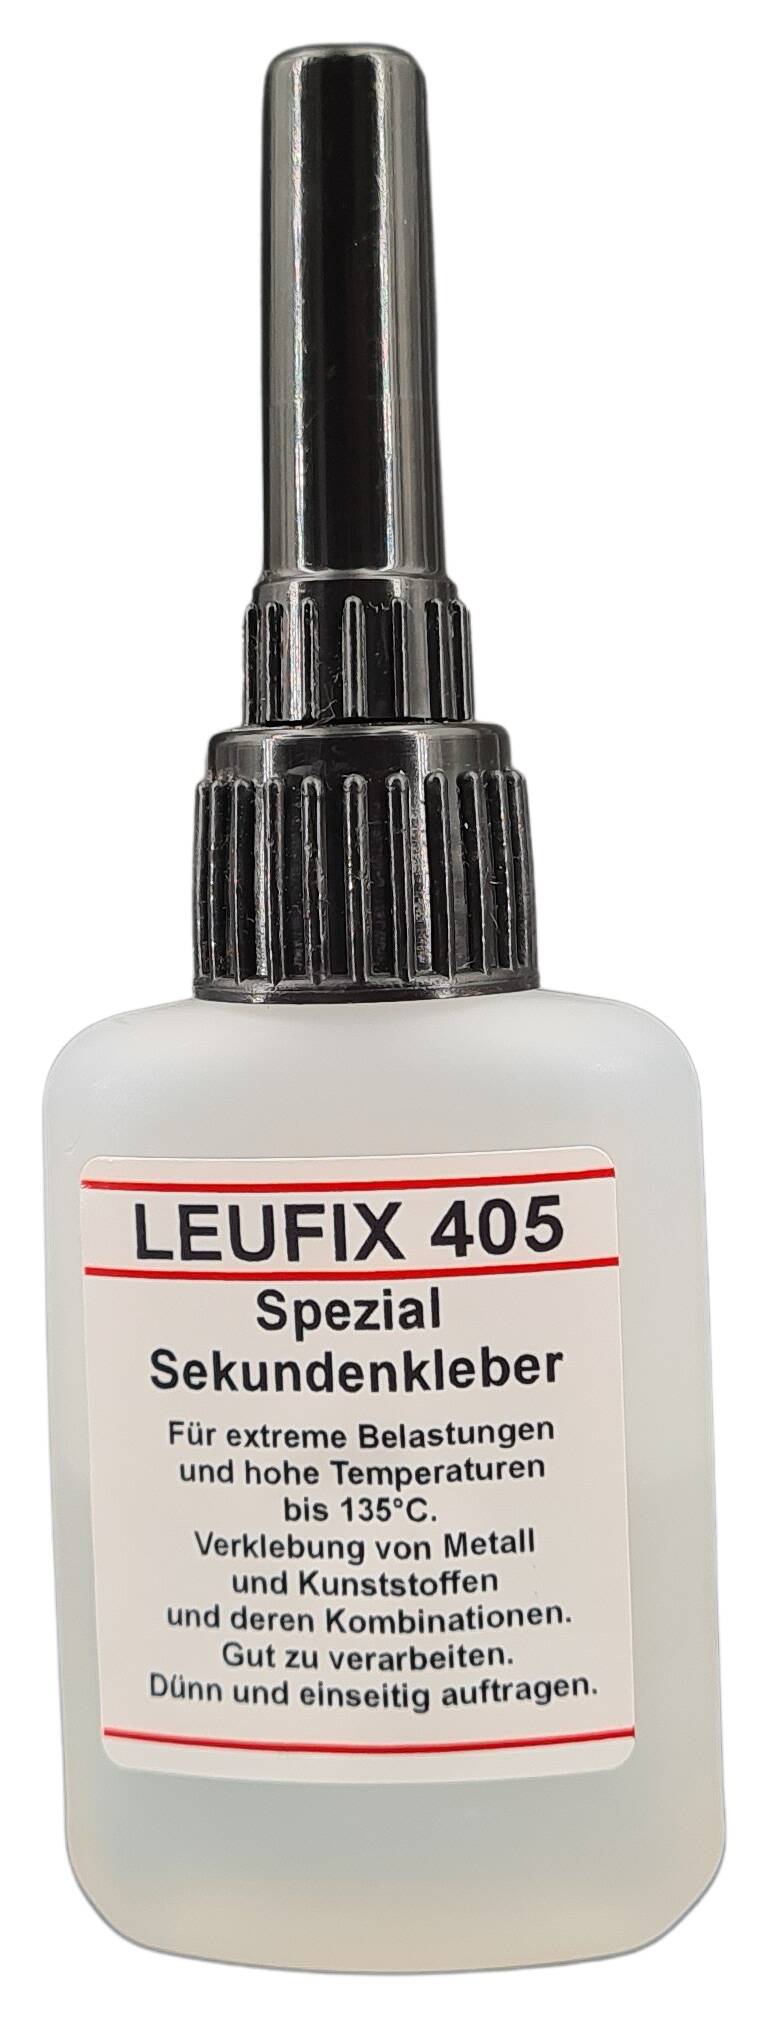 adhesive Leufix 405 á 20 gr. for extreme stresses and temperatures upto 150° for metal and plastic